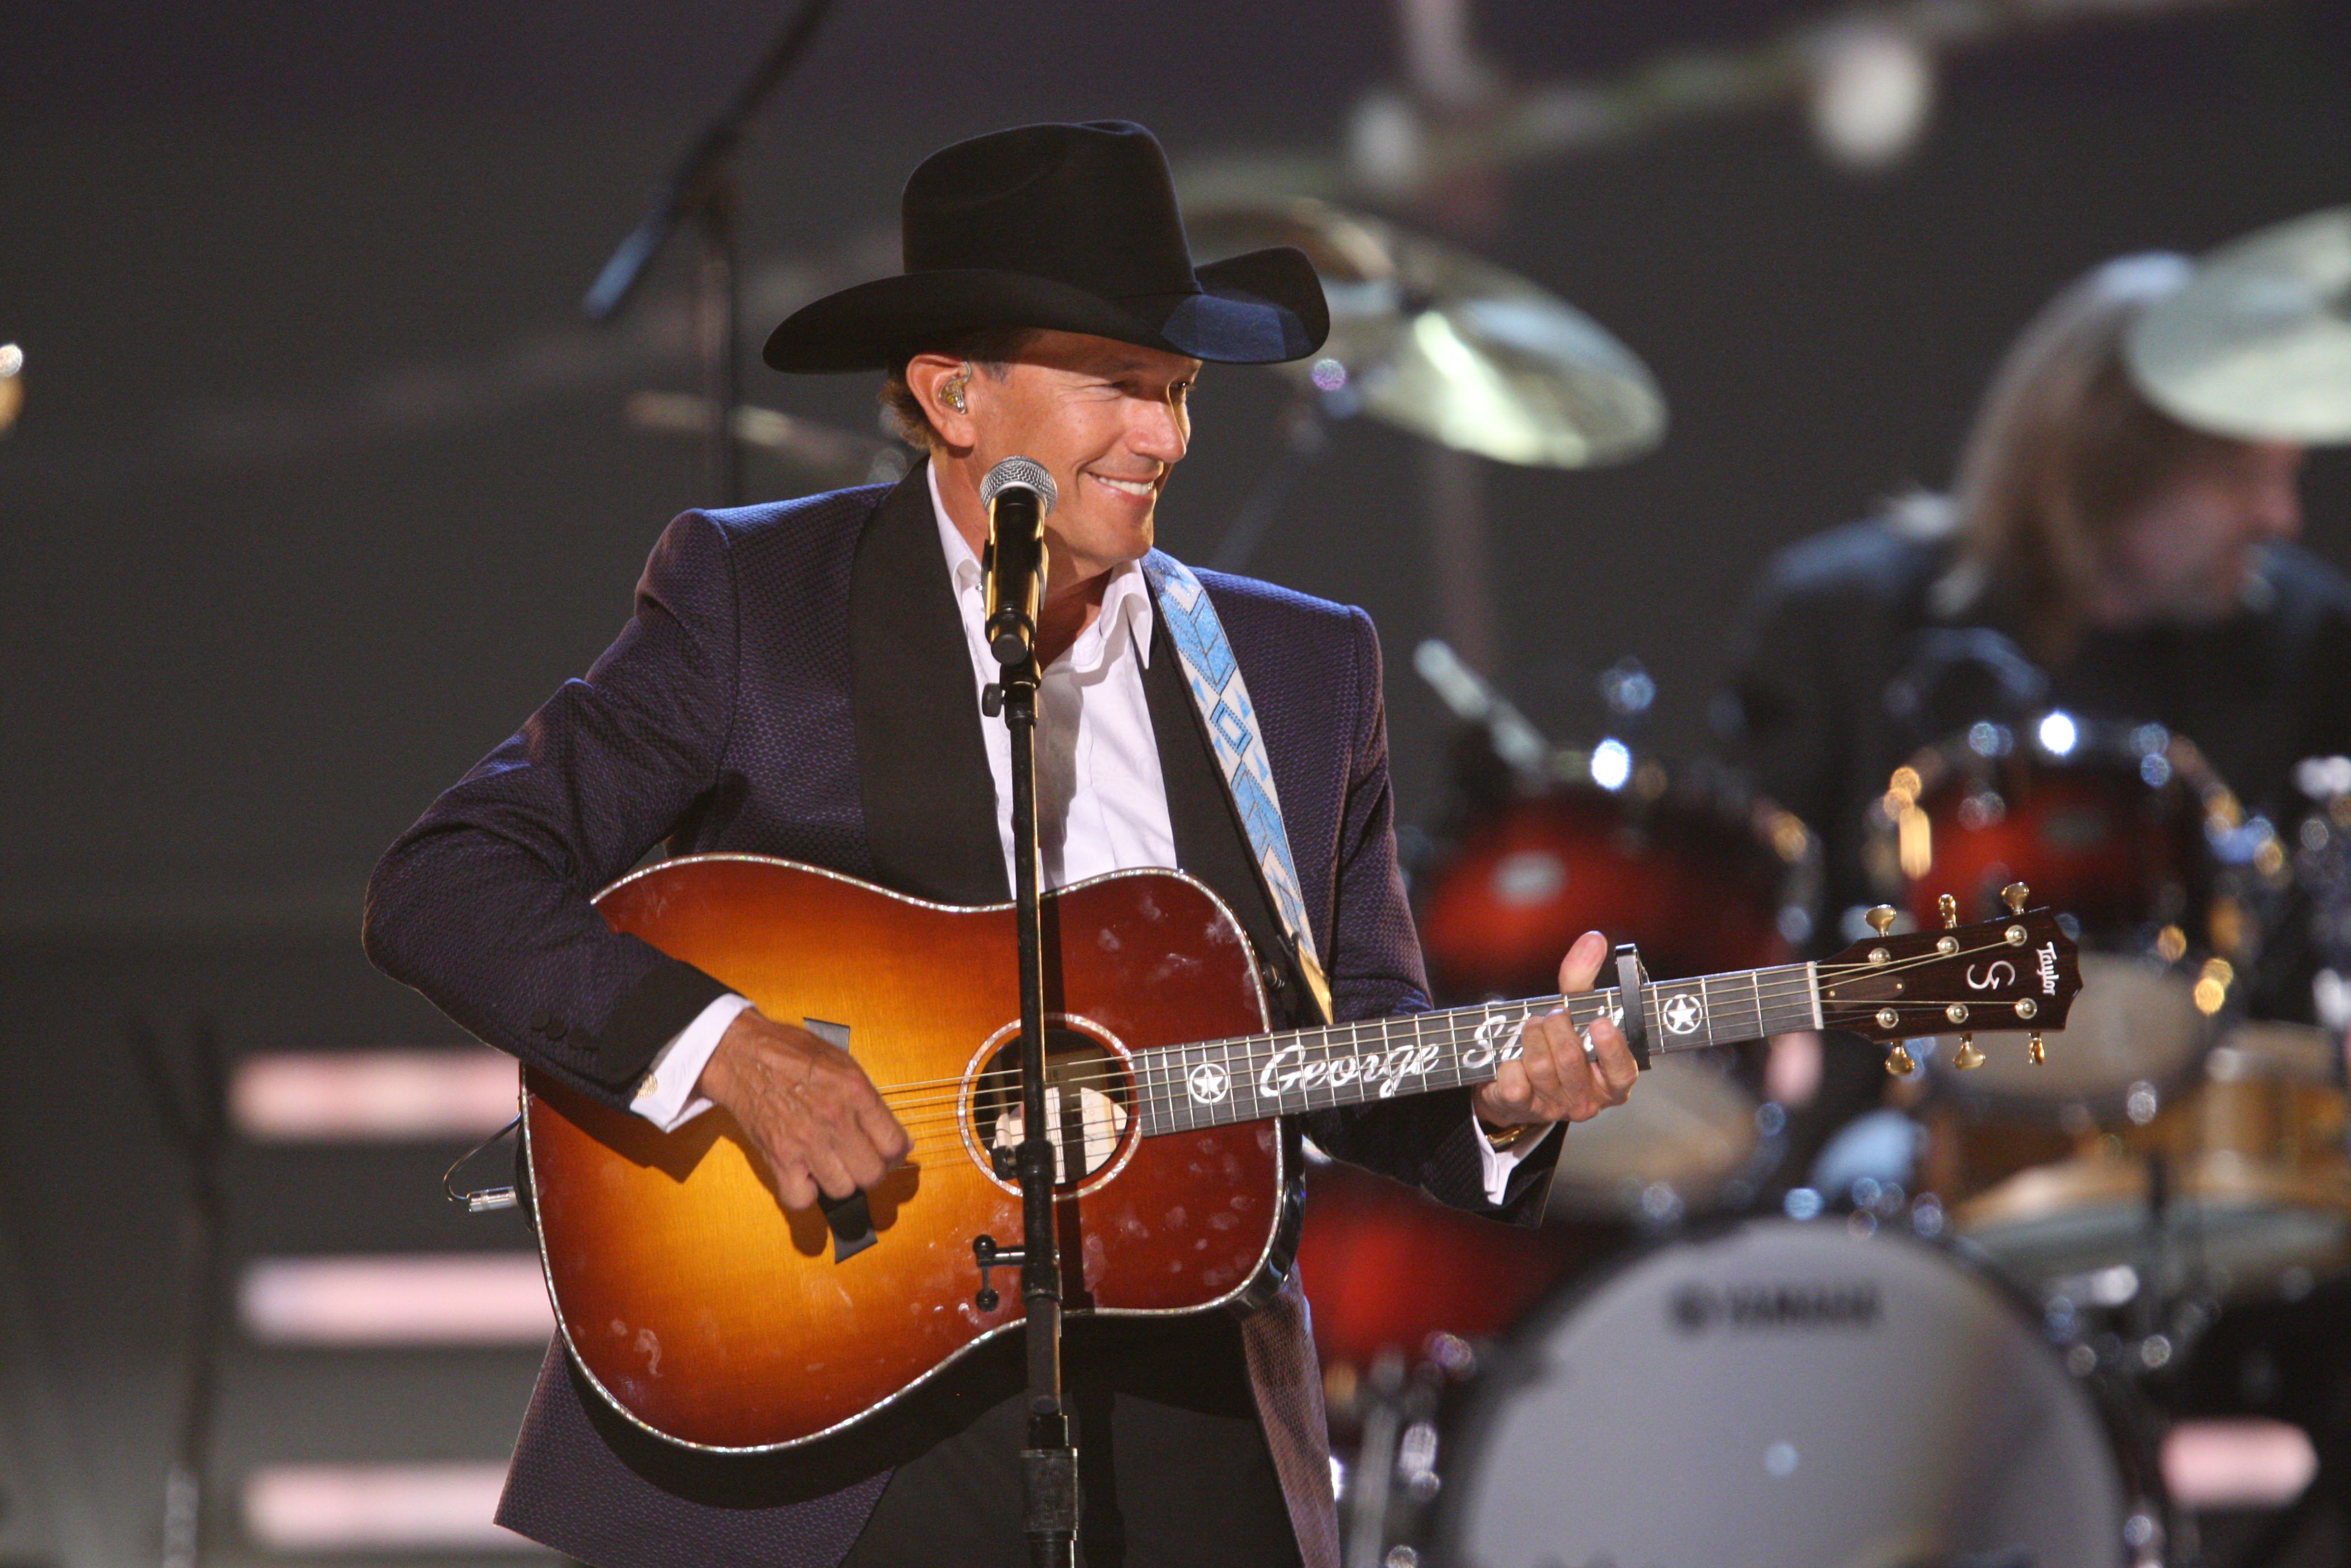 George Strait scheduled to perform on the 48th annual ACM Awards